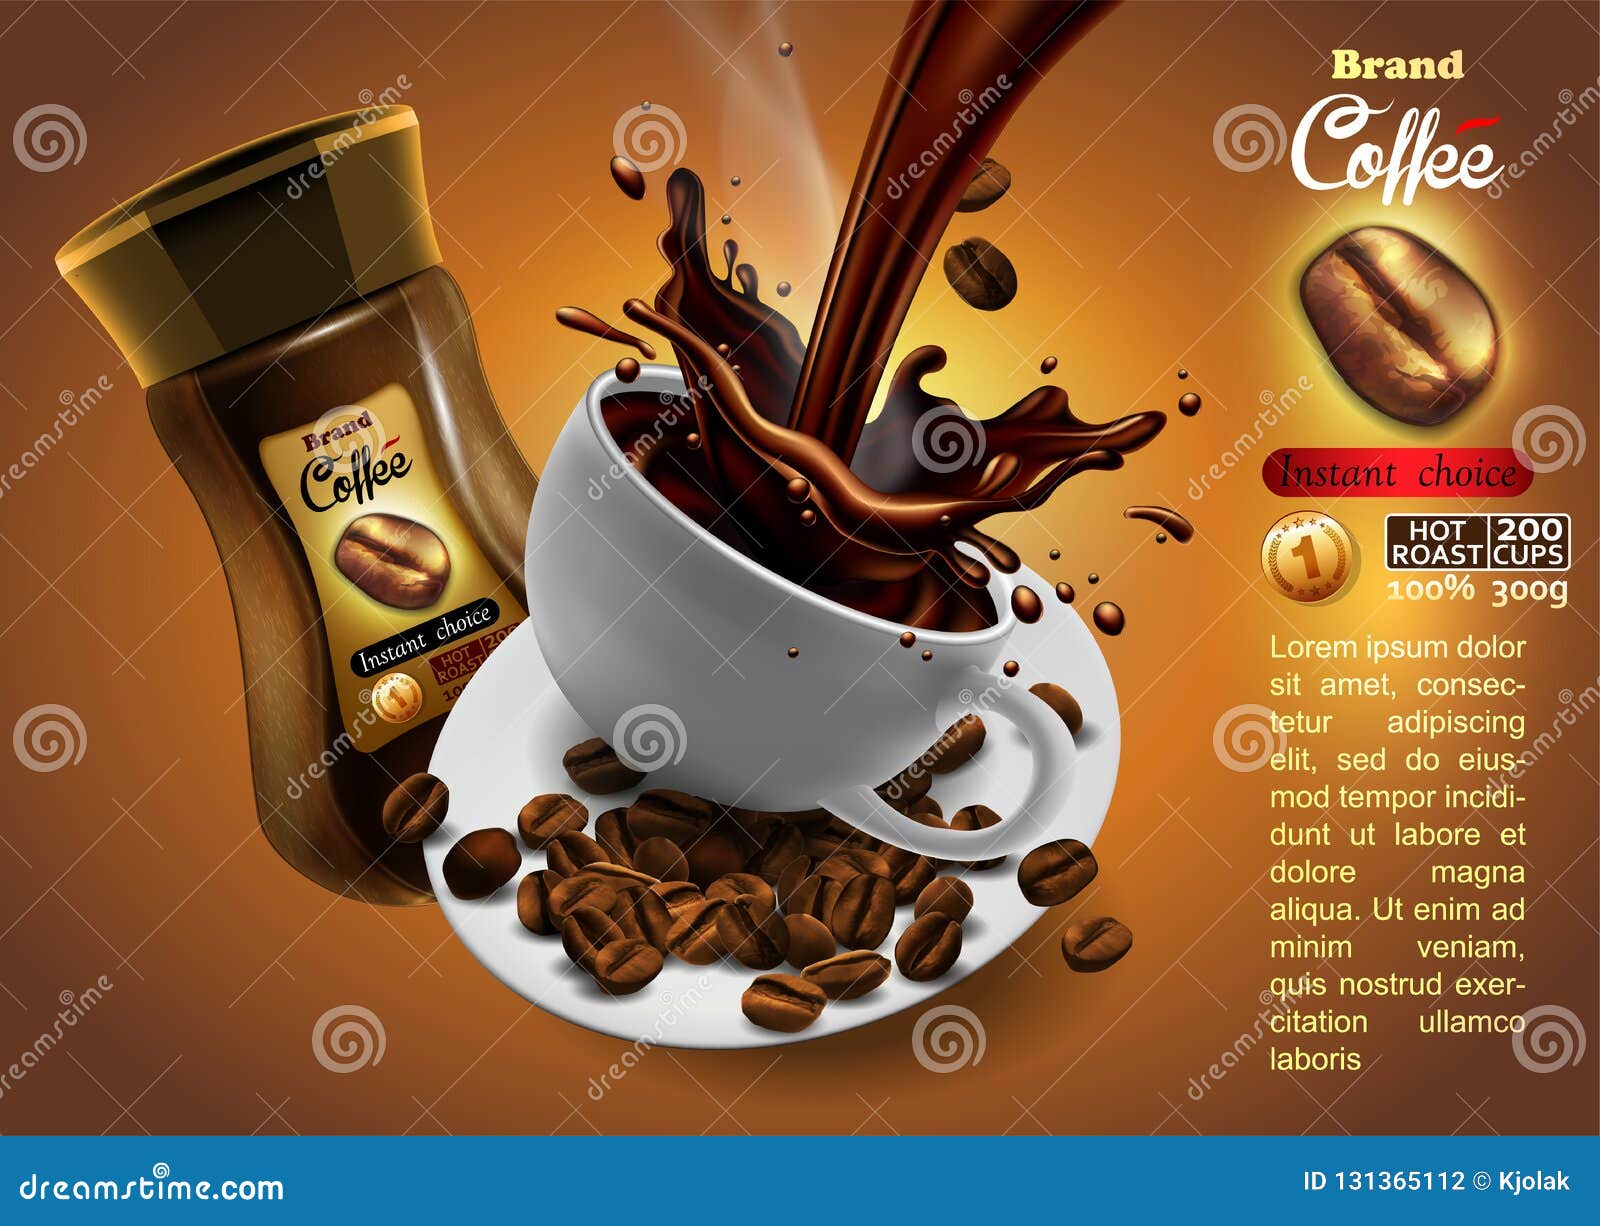 Coffee Advertising Design with Cup of Coffee and Splash Effect, Stock  Vector - Illustration of beans, brand: 131365112